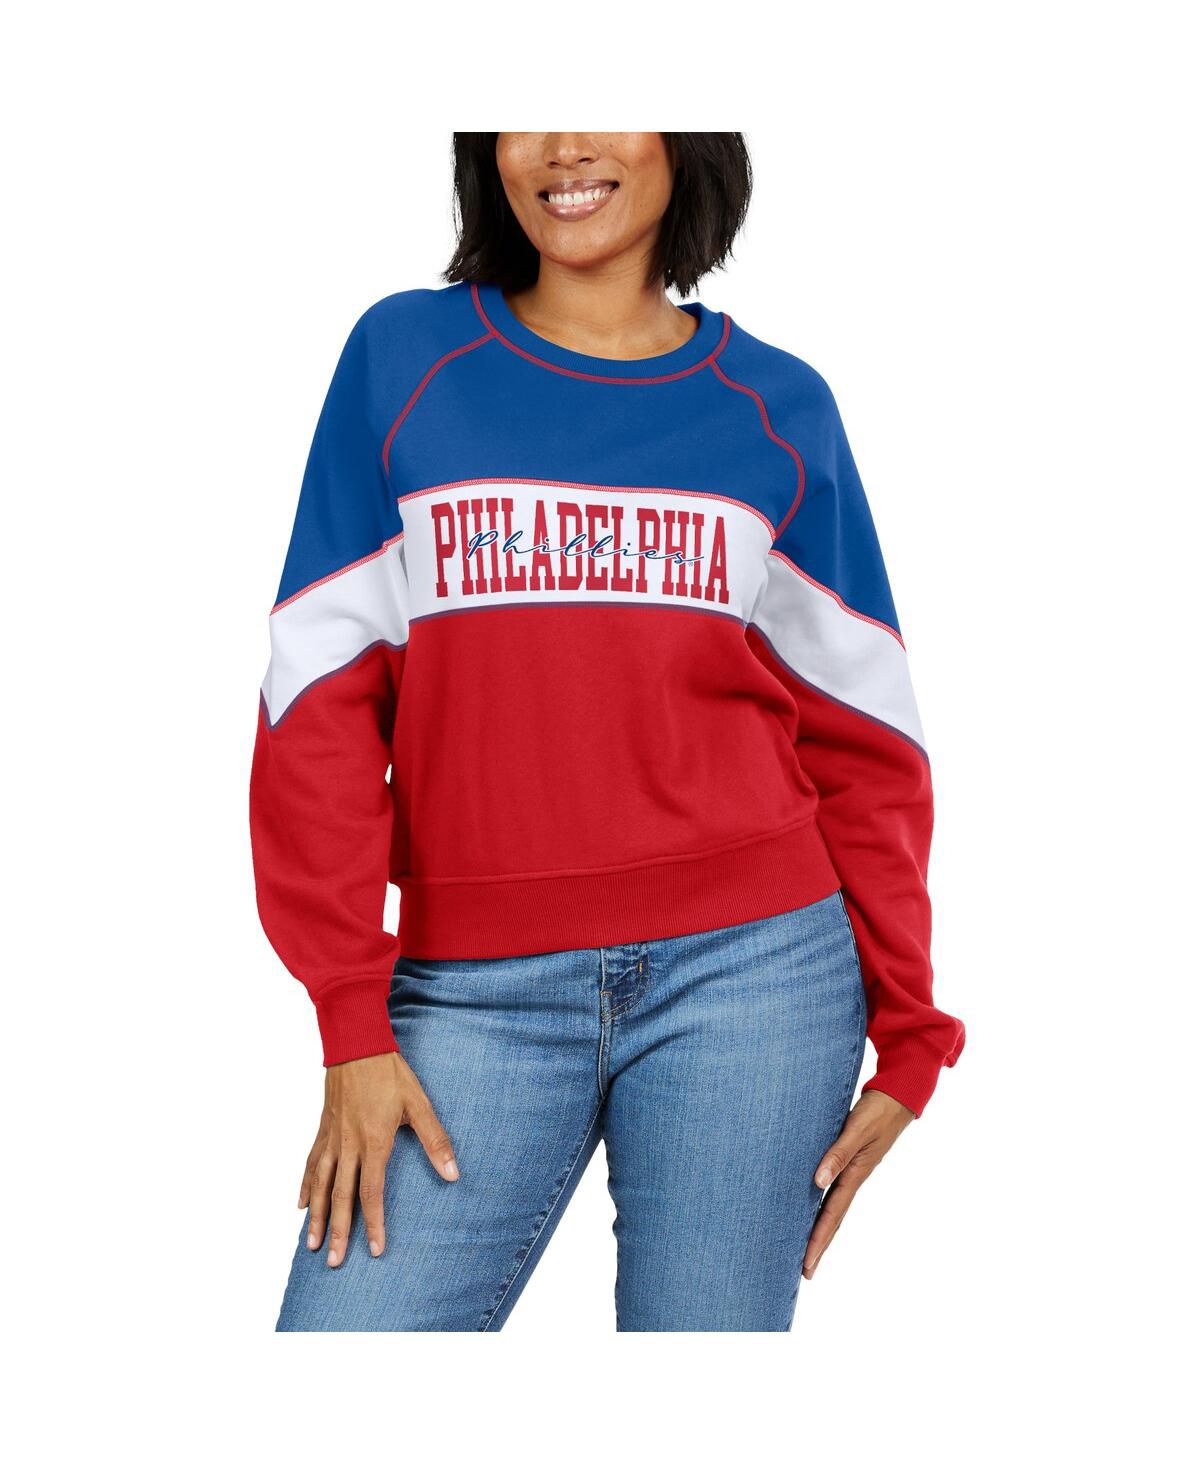 Shop Wear By Erin Andrews Women's  Royal, Red Philadelphia Phillies Crewneck Pullover Sweatshirt In Royal,red